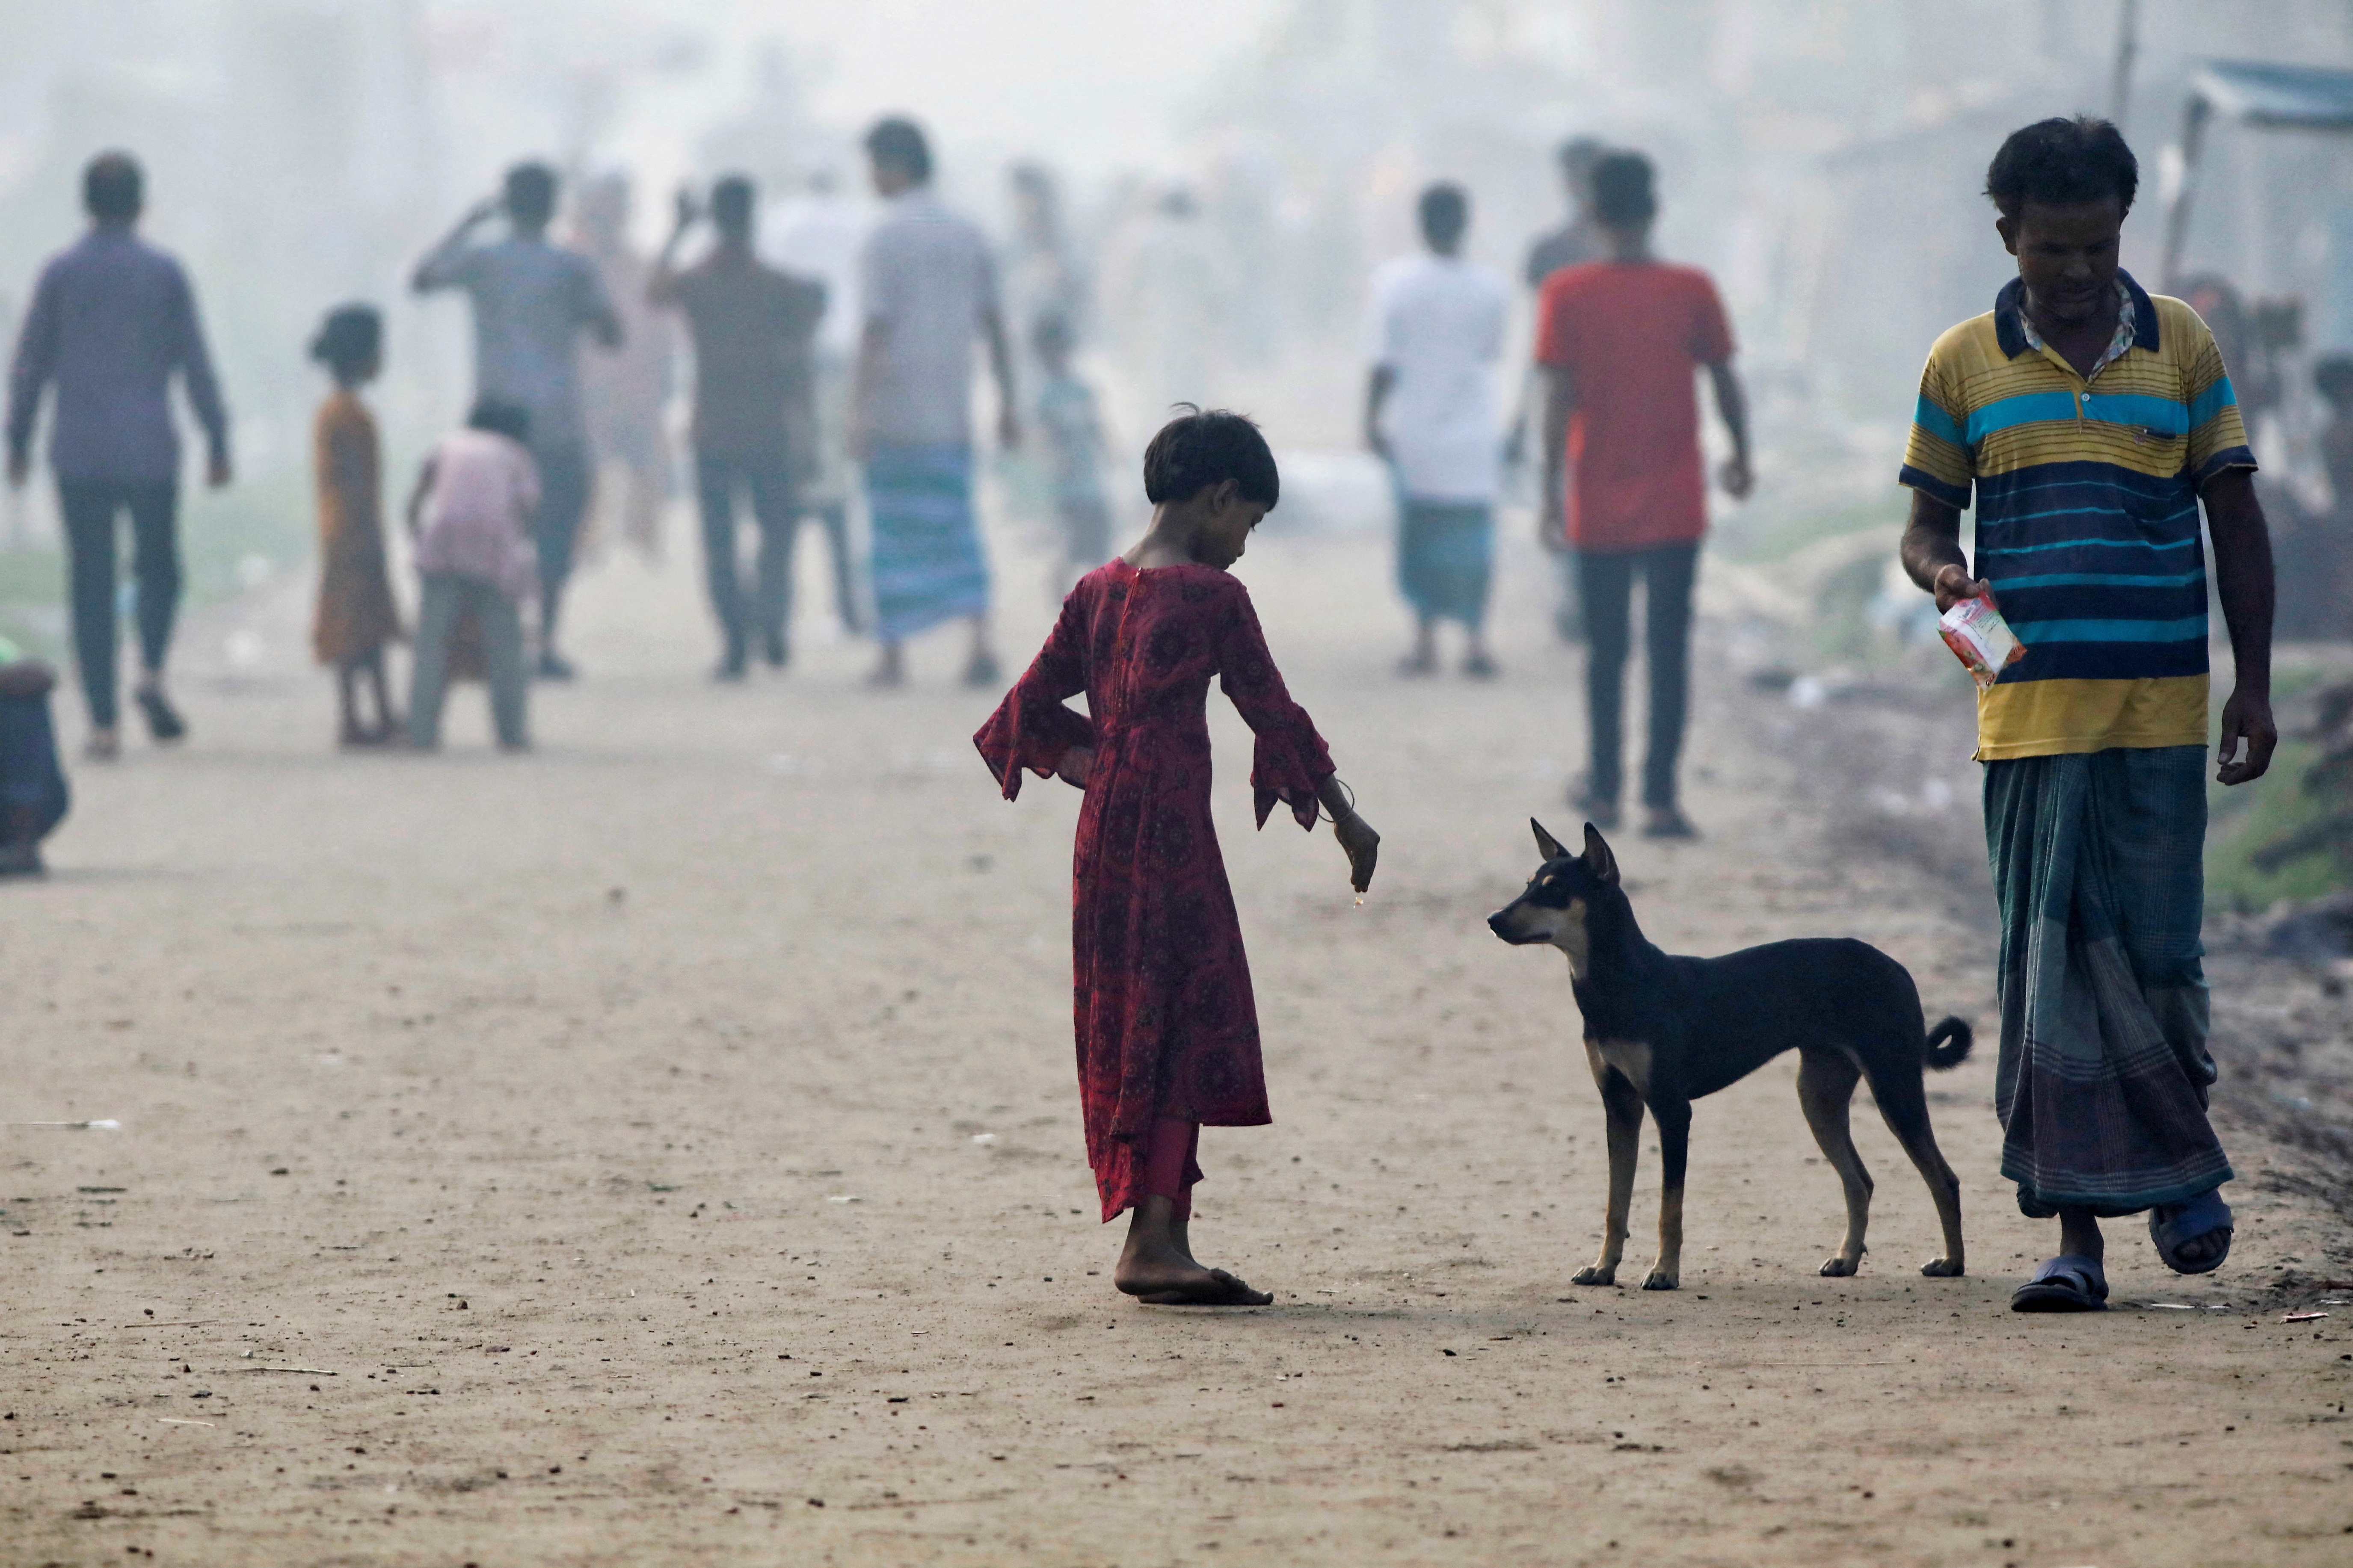 A girl feeds a dog beside an industrial area in Dhaka